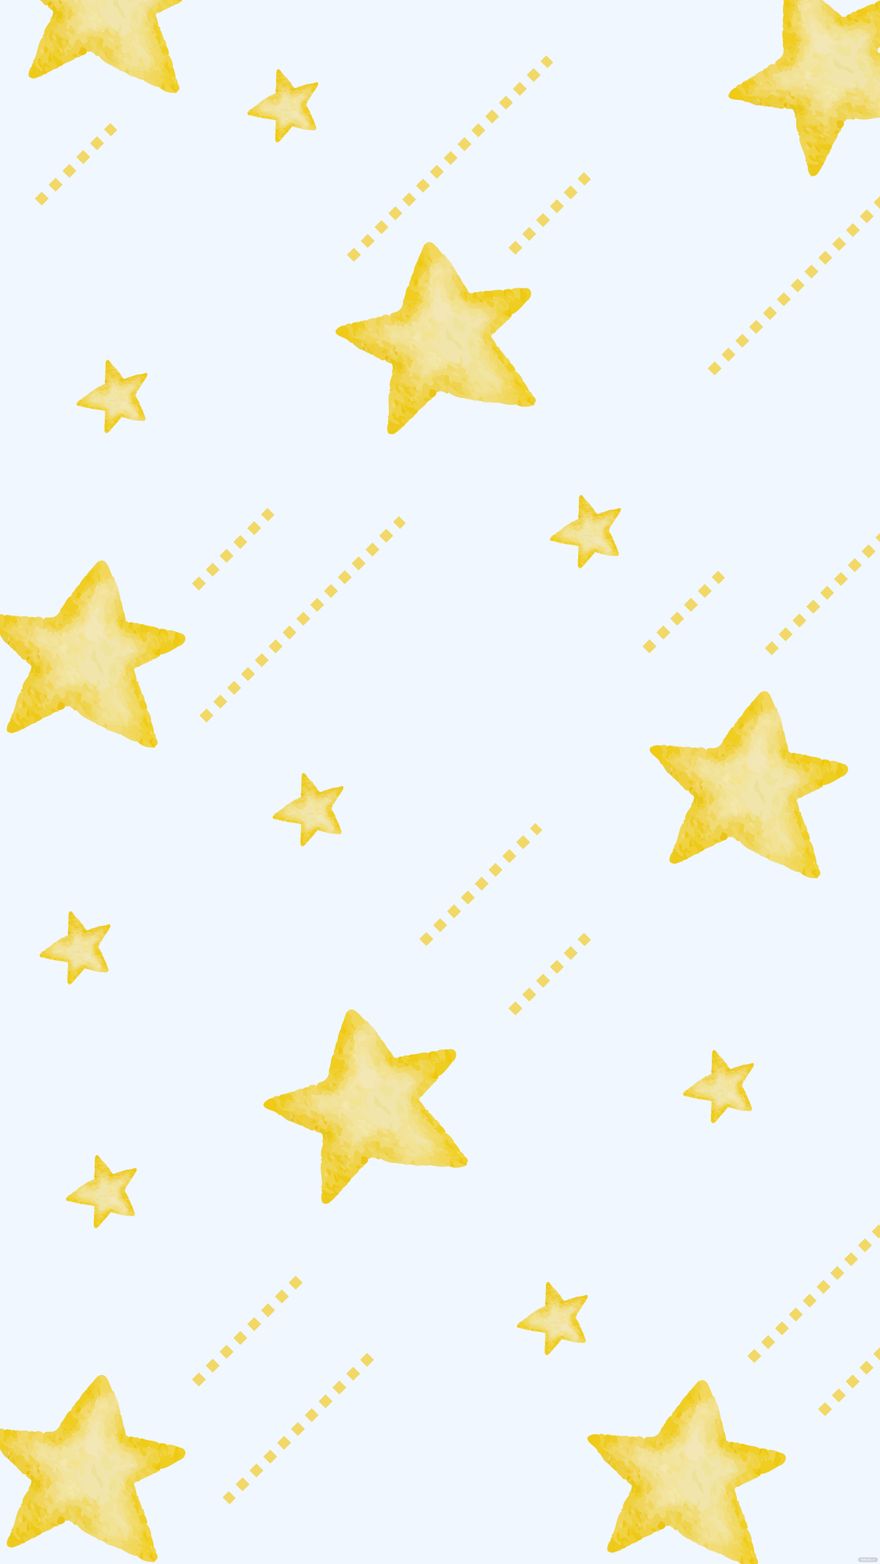 Free Watercolor Star Background